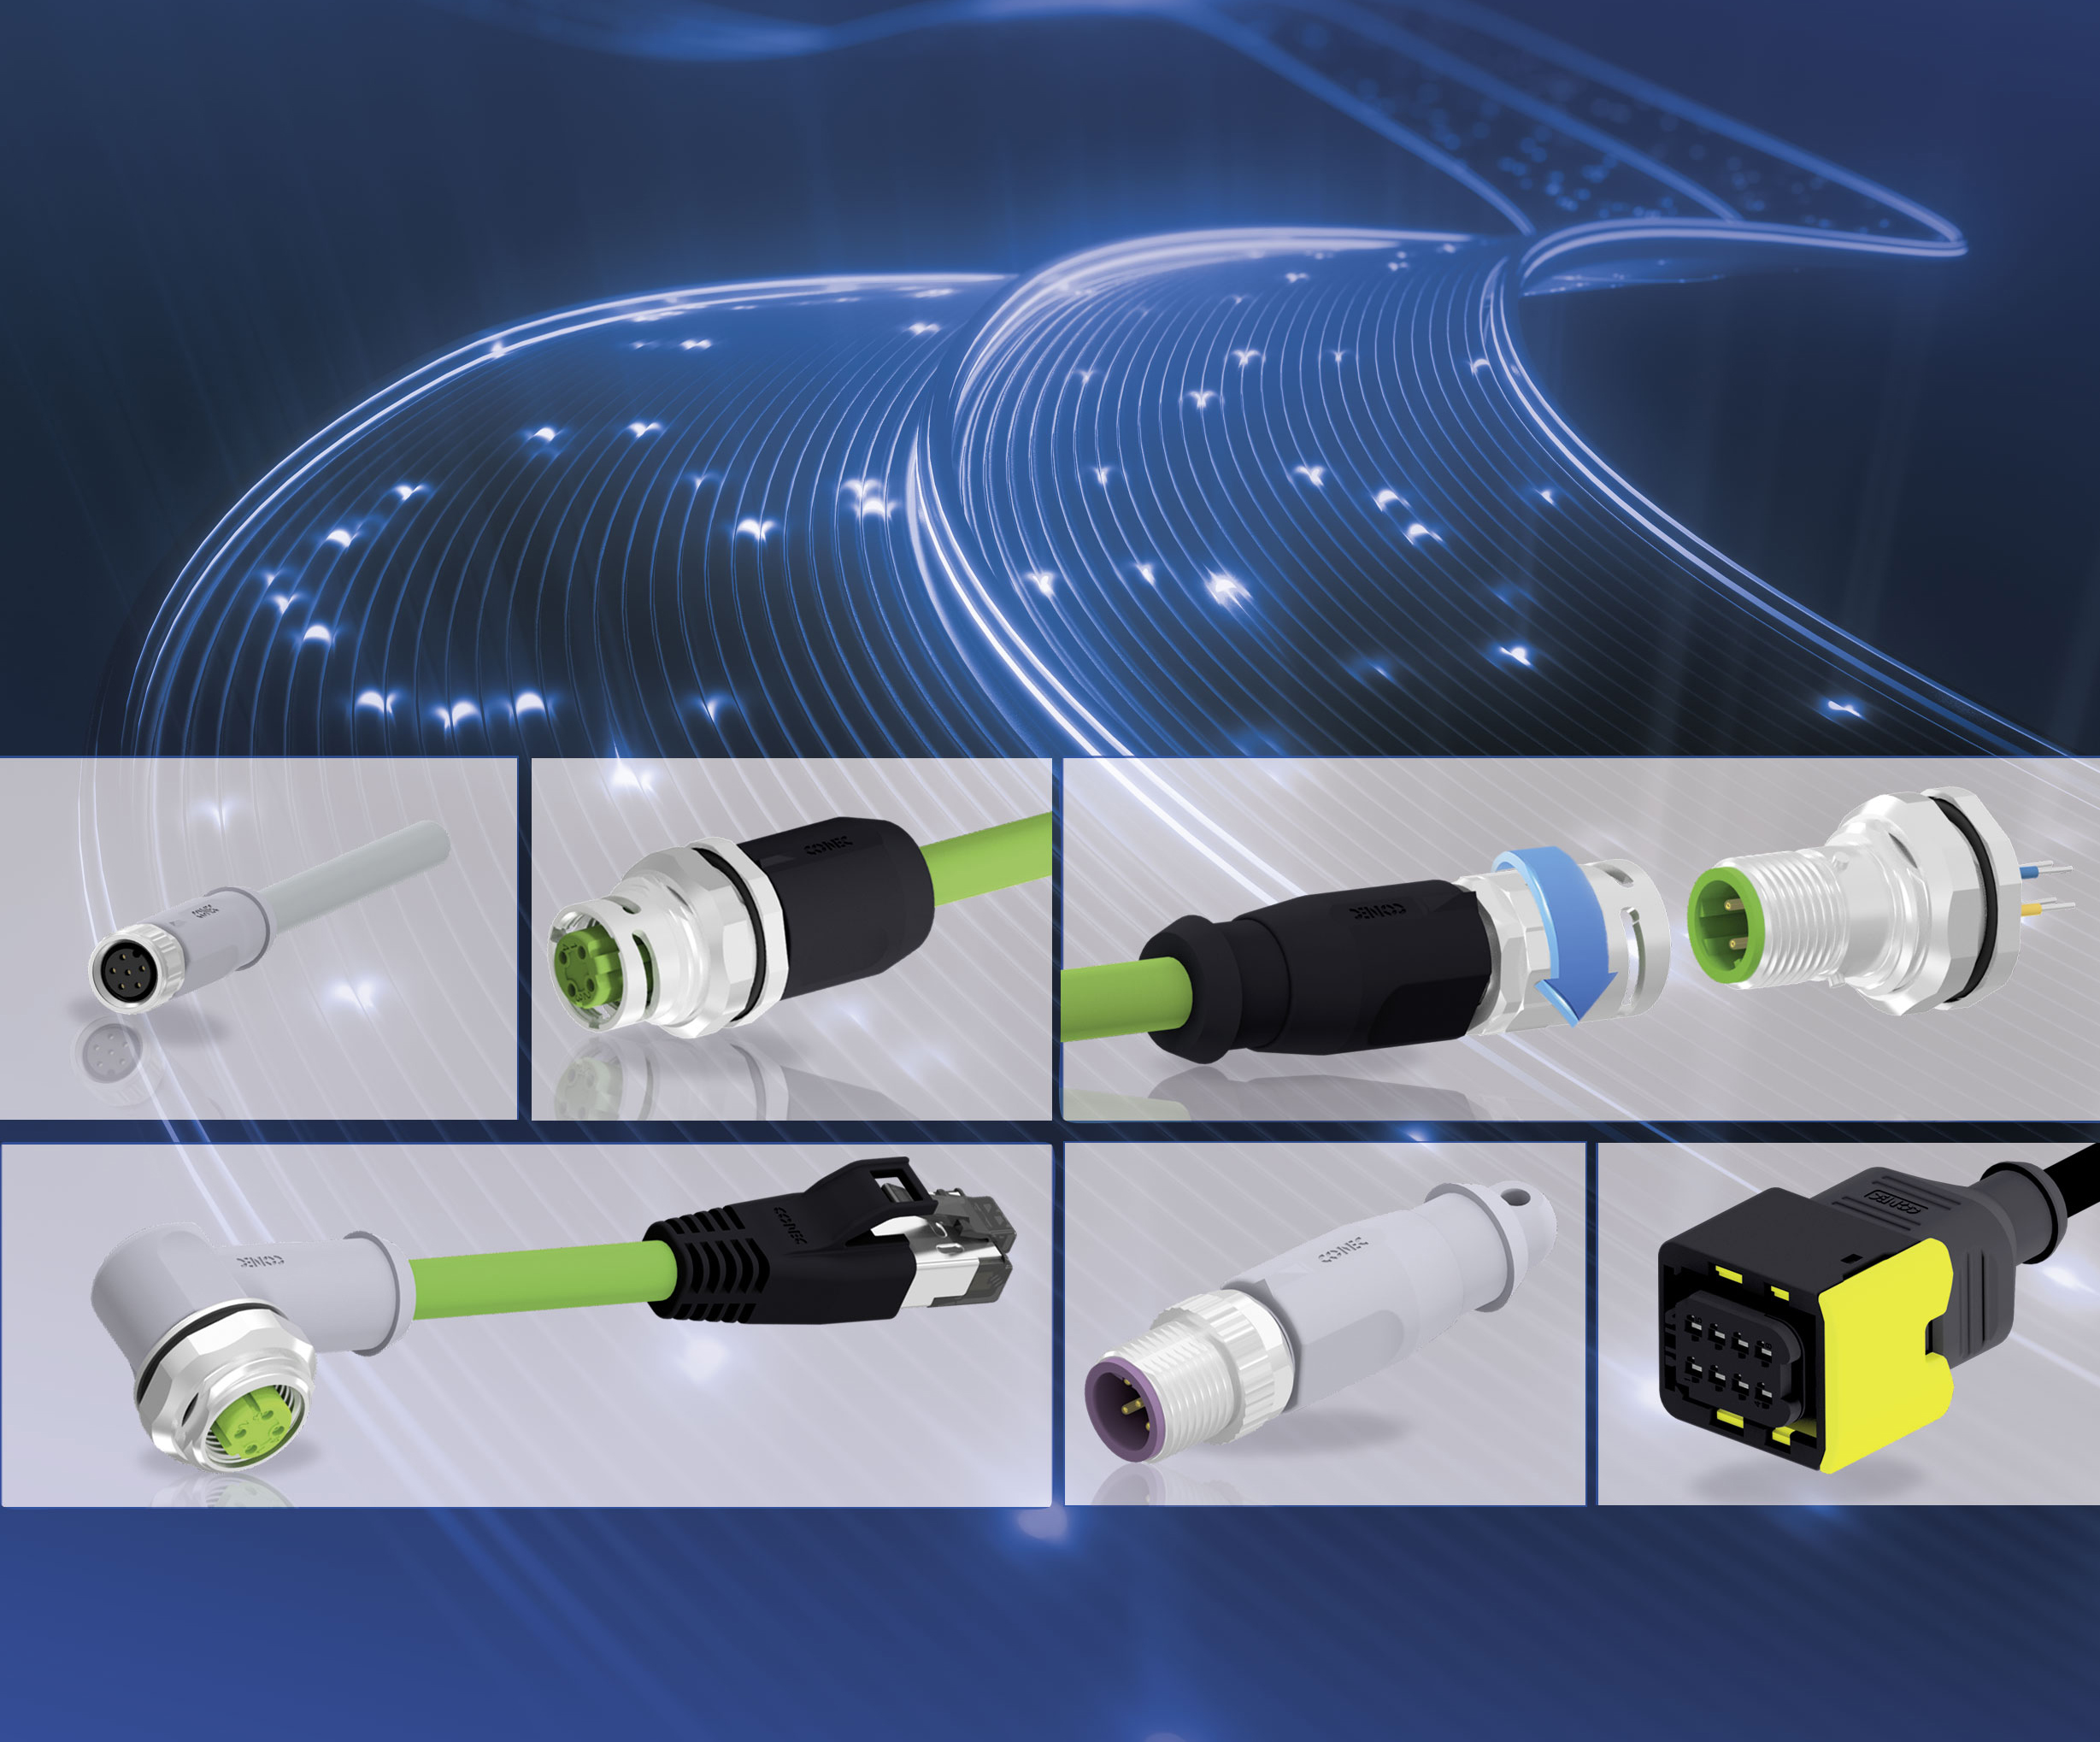 CONEC Product News 2021: New connectors for automation